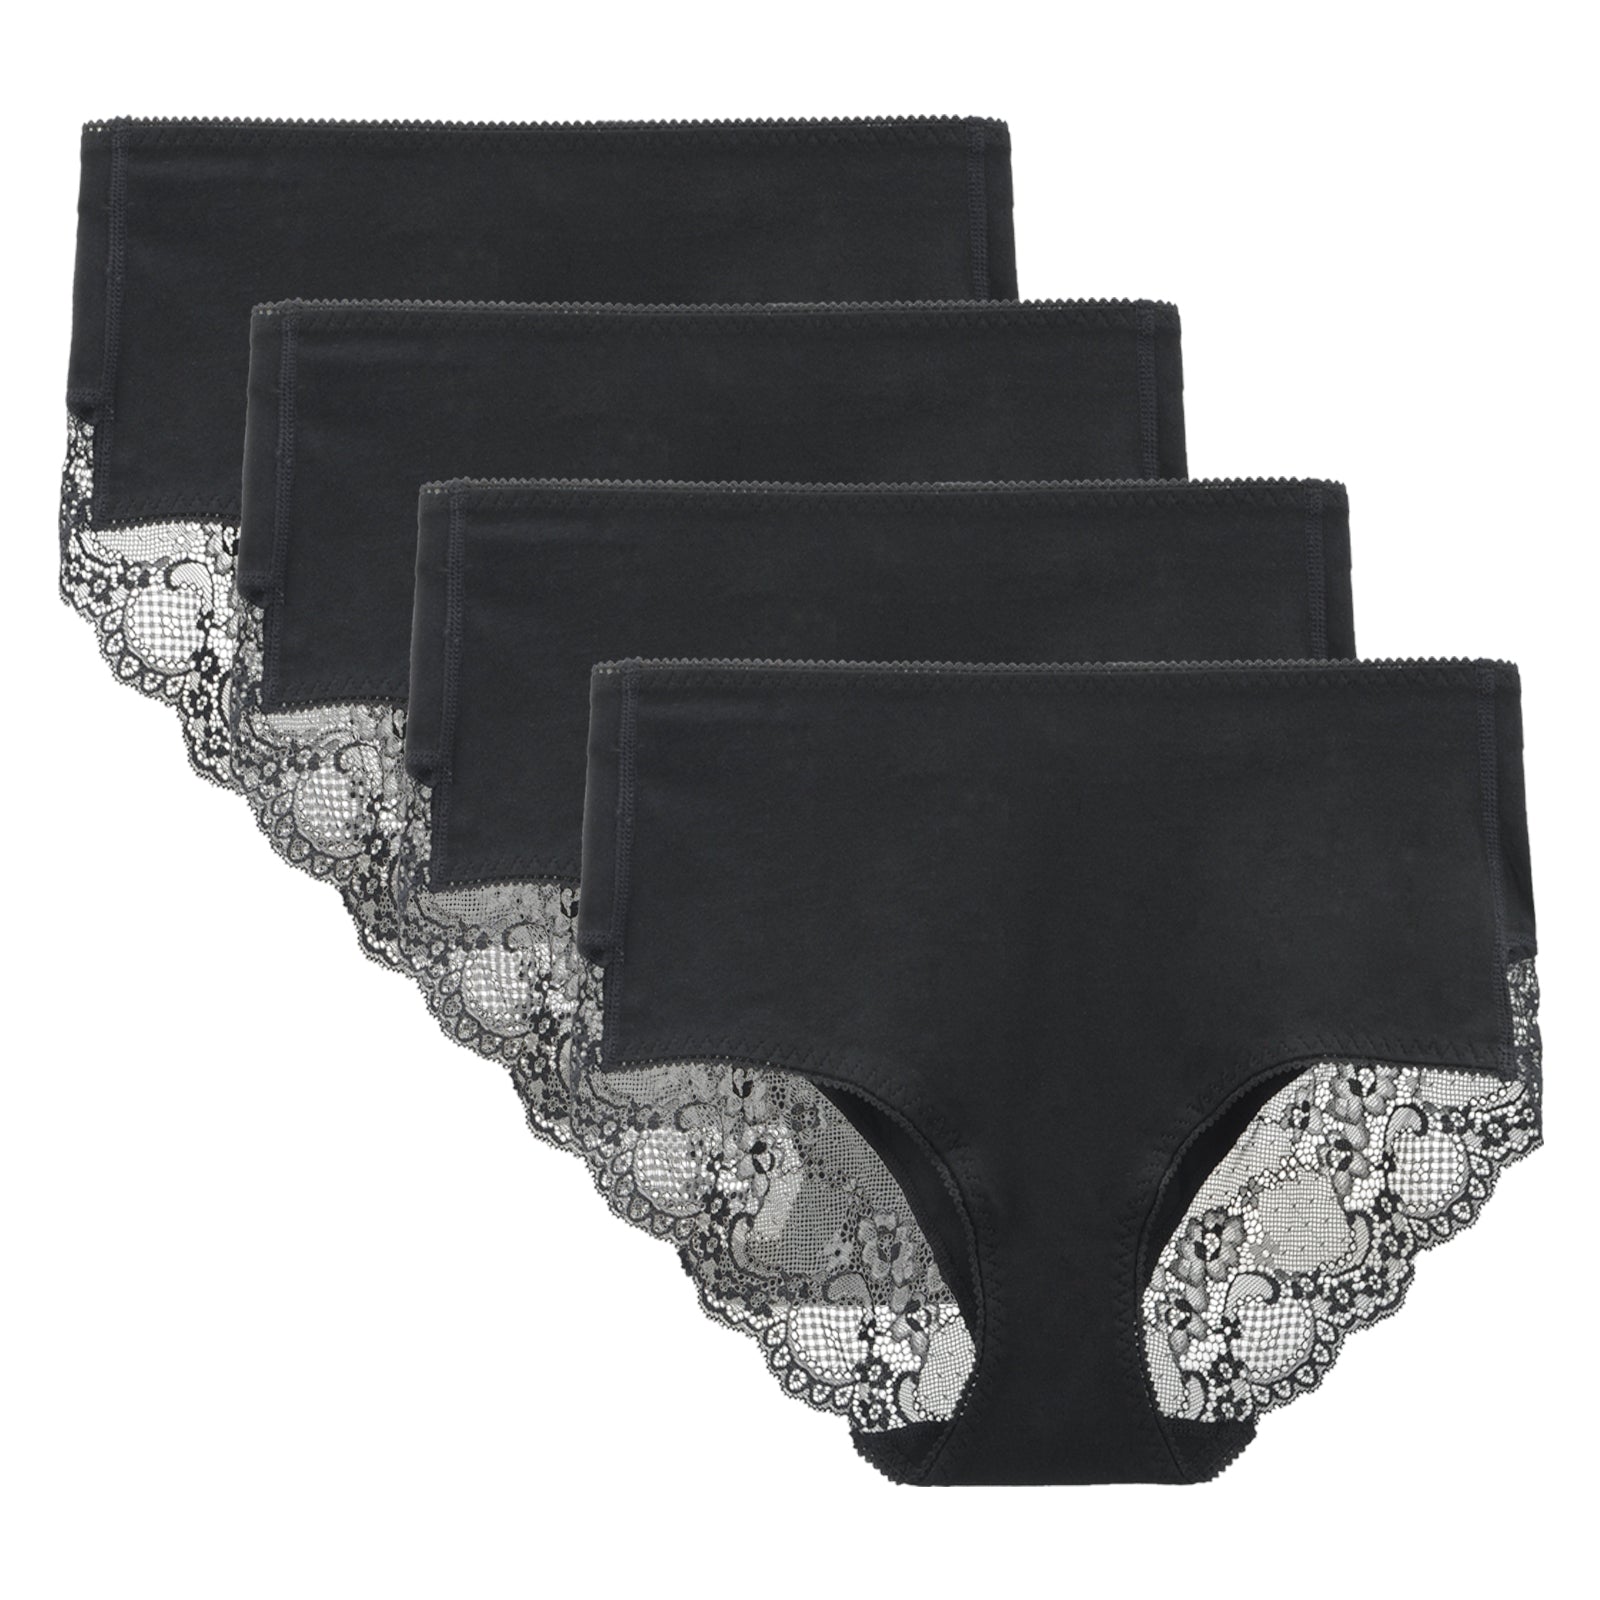 LIQQY Women's Low Rise Cotton No Wedgie Lace Coverage Bikini Panty  Underwear 4 Pack (Small, Black) at  Women's Clothing store